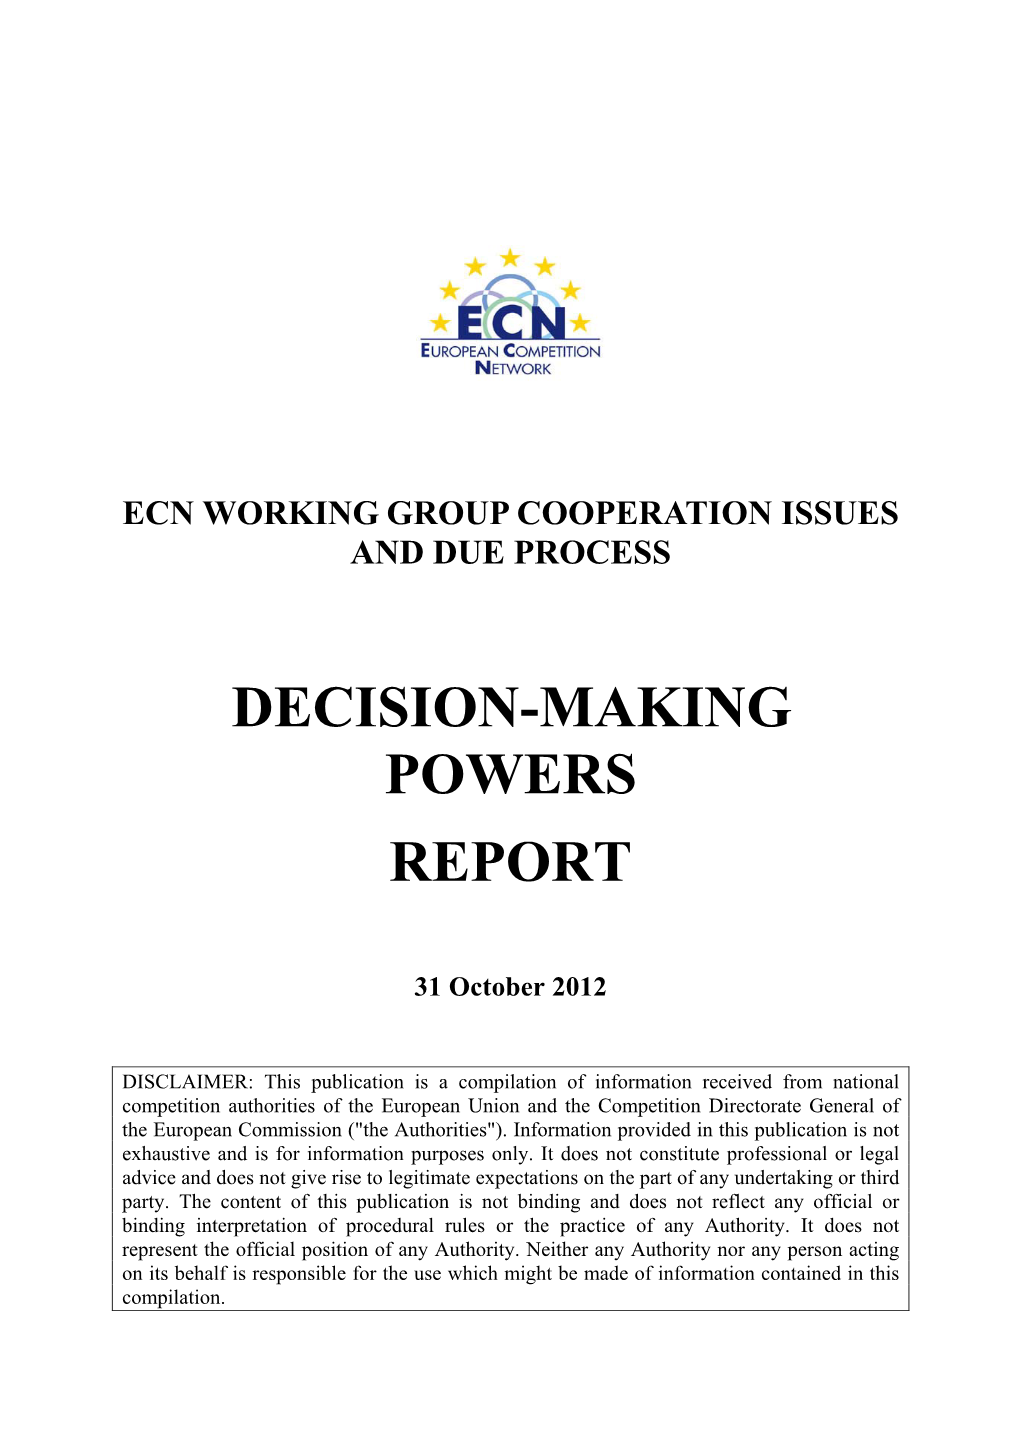 Decision-Making Powers Report